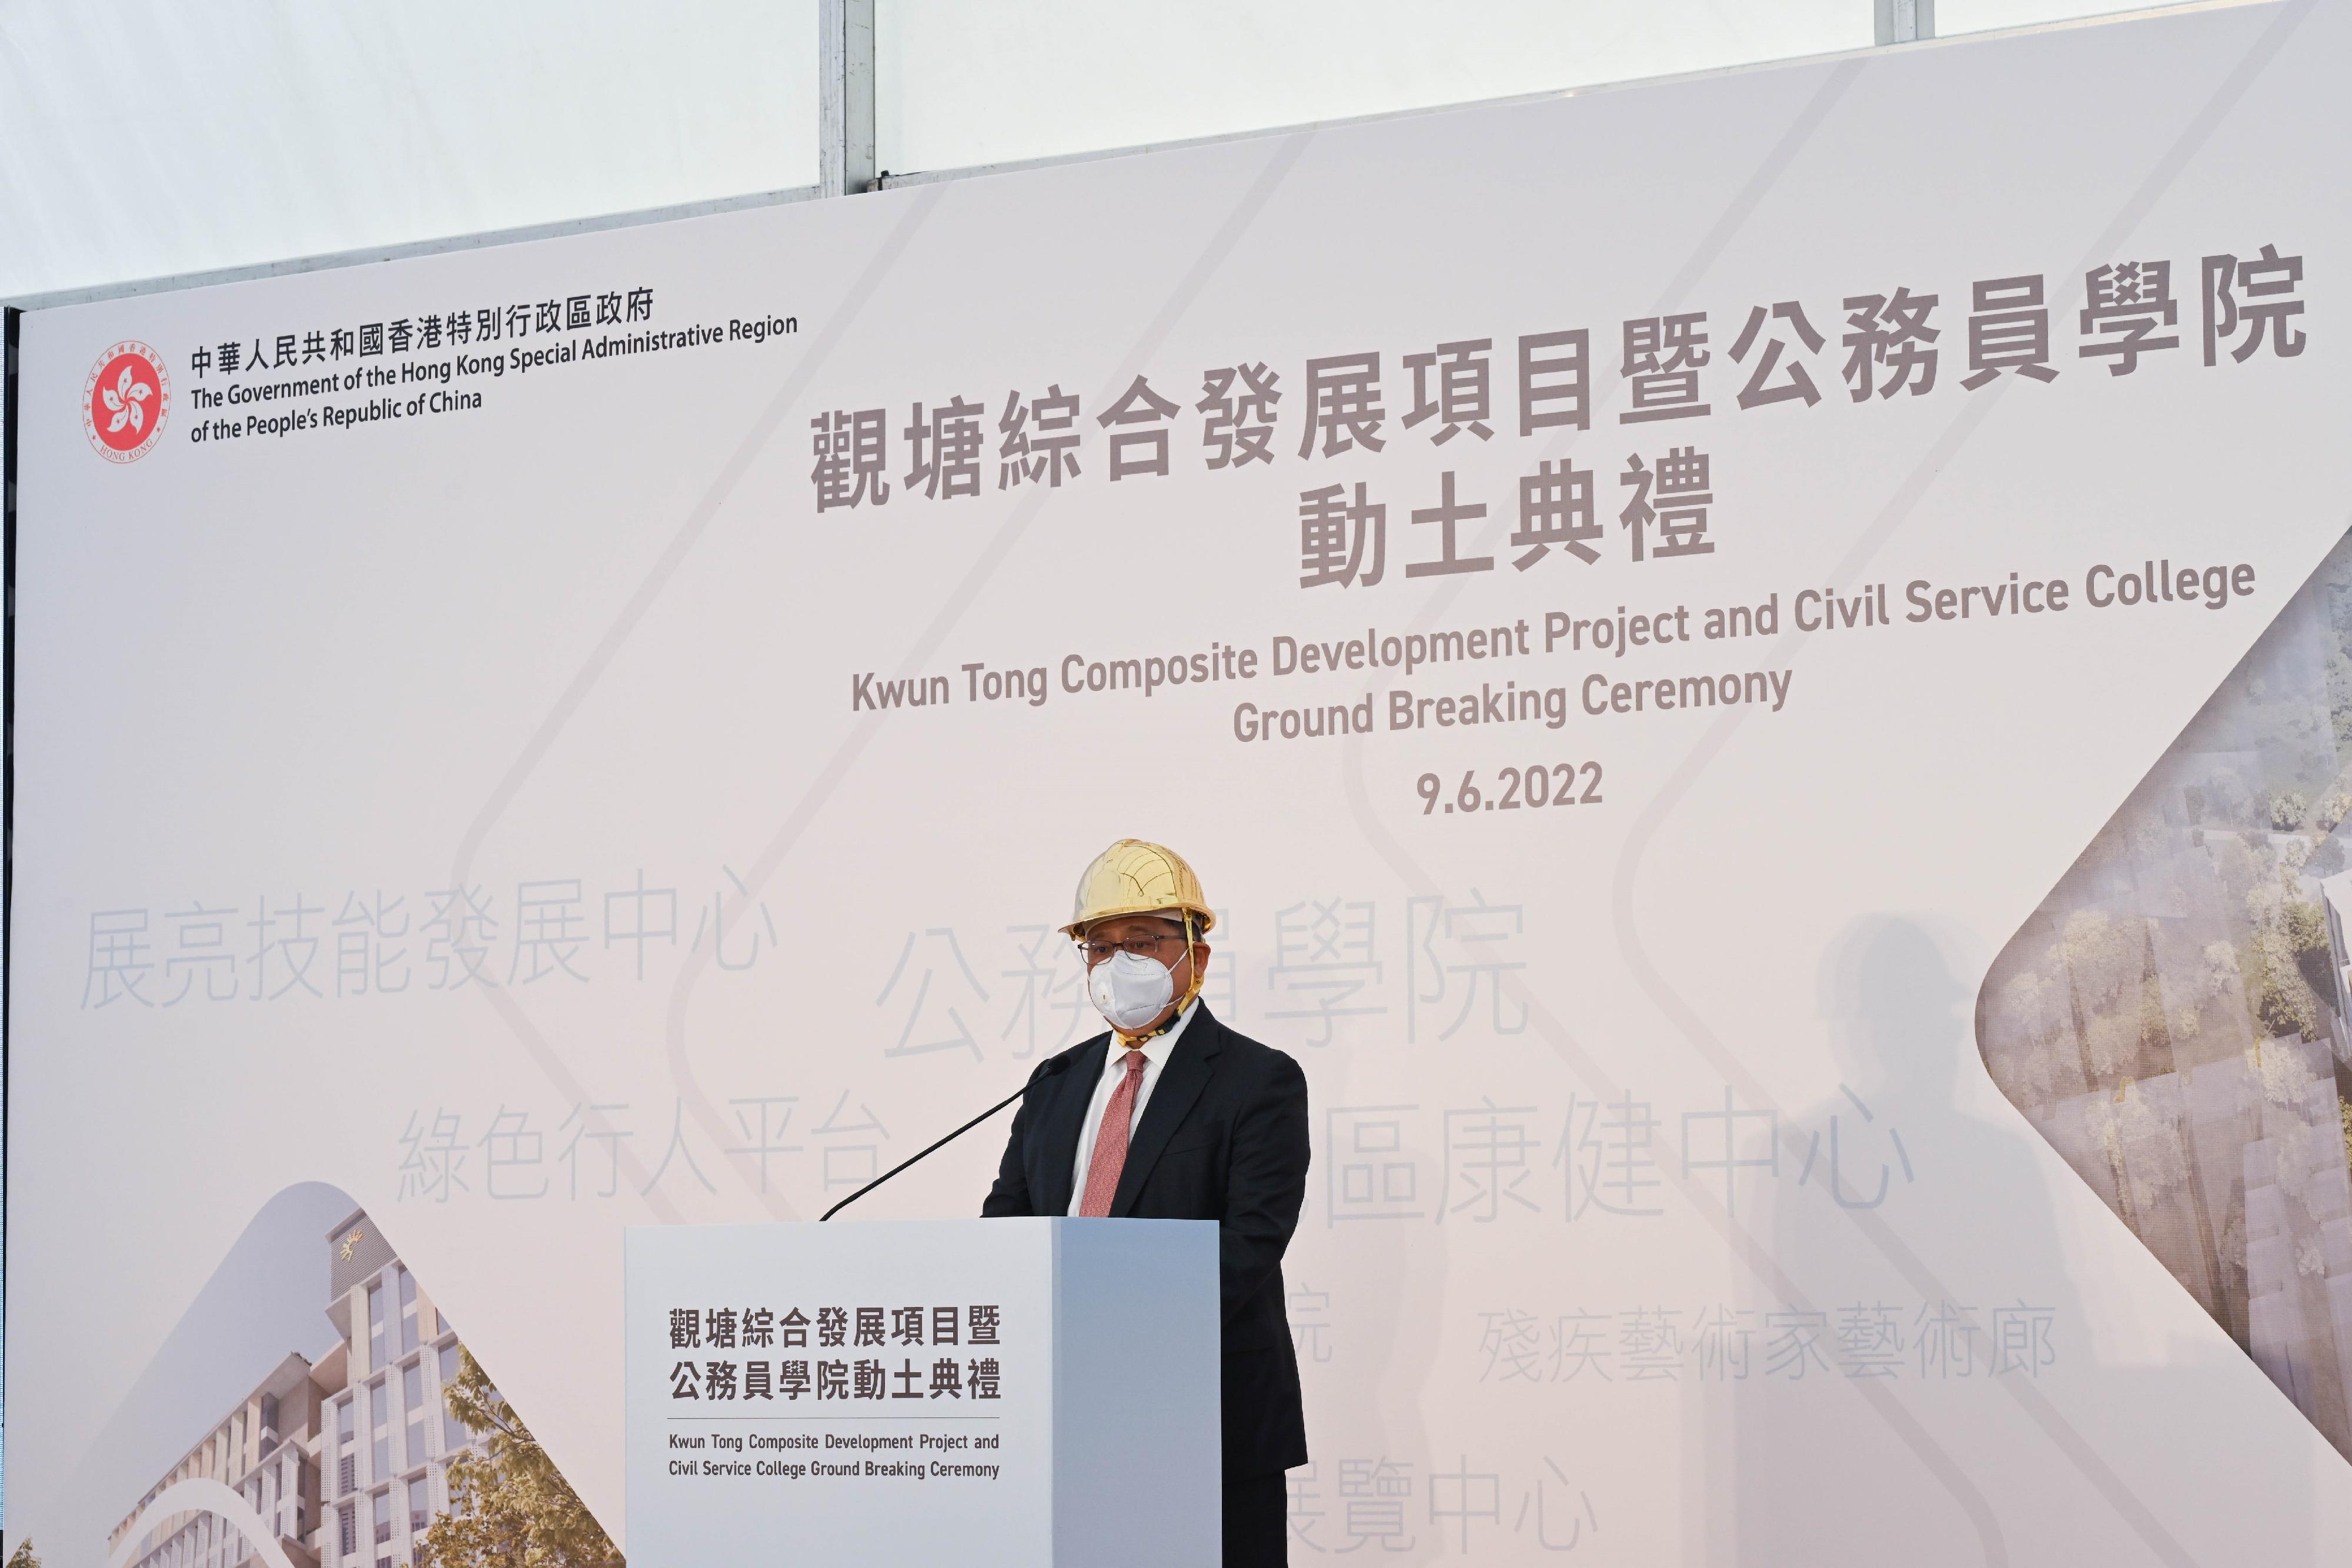 The ground breaking ceremony of the Kwun Tong Composite Development Project and Civil Service College took place today (June 9) to mark the launch of the construction project. Photo shows the Chairman of the Civil Service Training Advisory Board, Dr Victor Fung, delivering a speech at the ceremony.